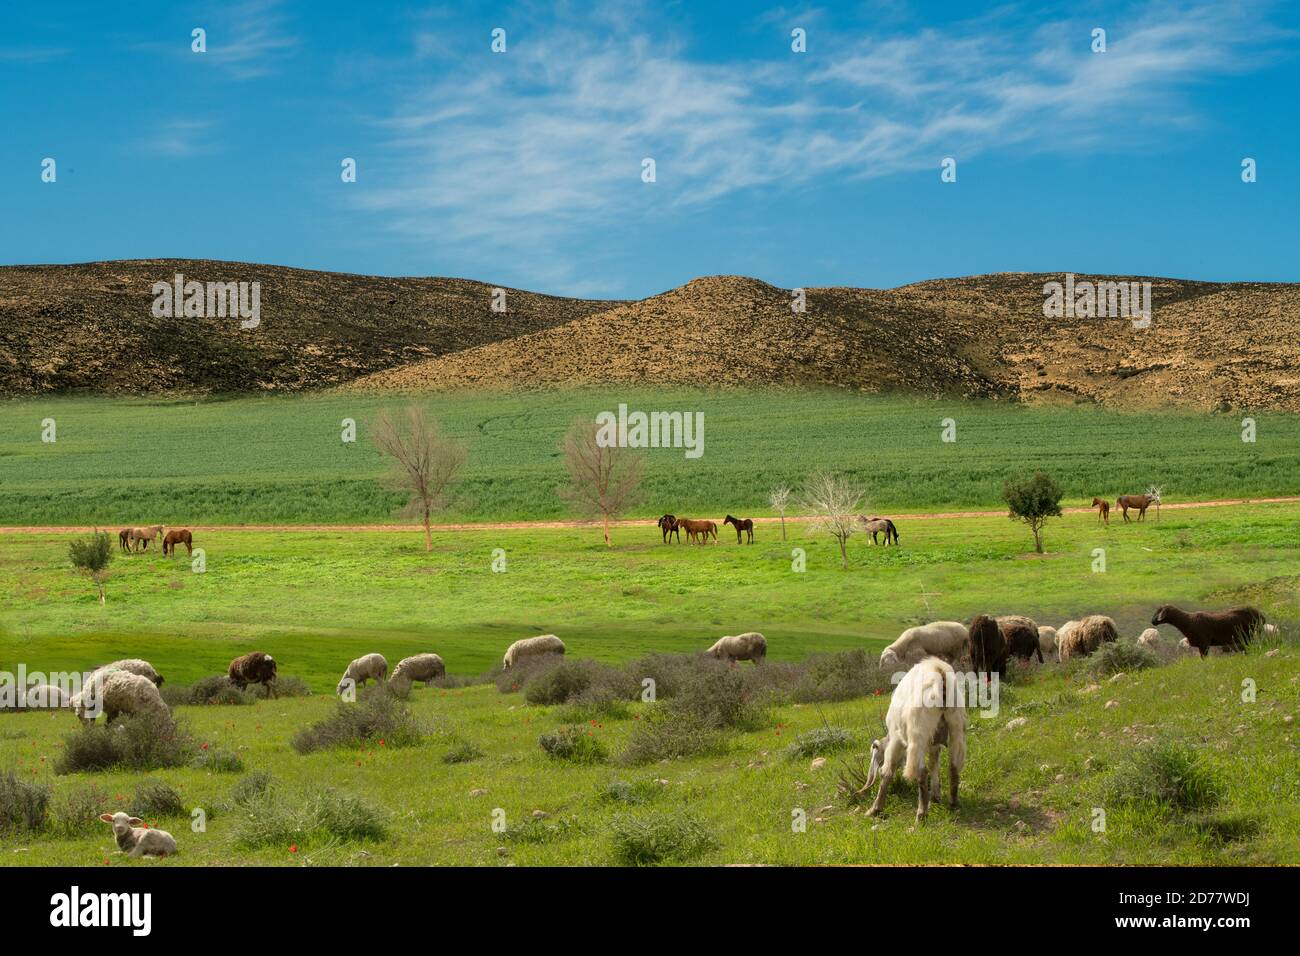 Desert Agriculture Livestock farming Goats and sheep herding Photographed in the Negev Desert, Israel Stock Photo